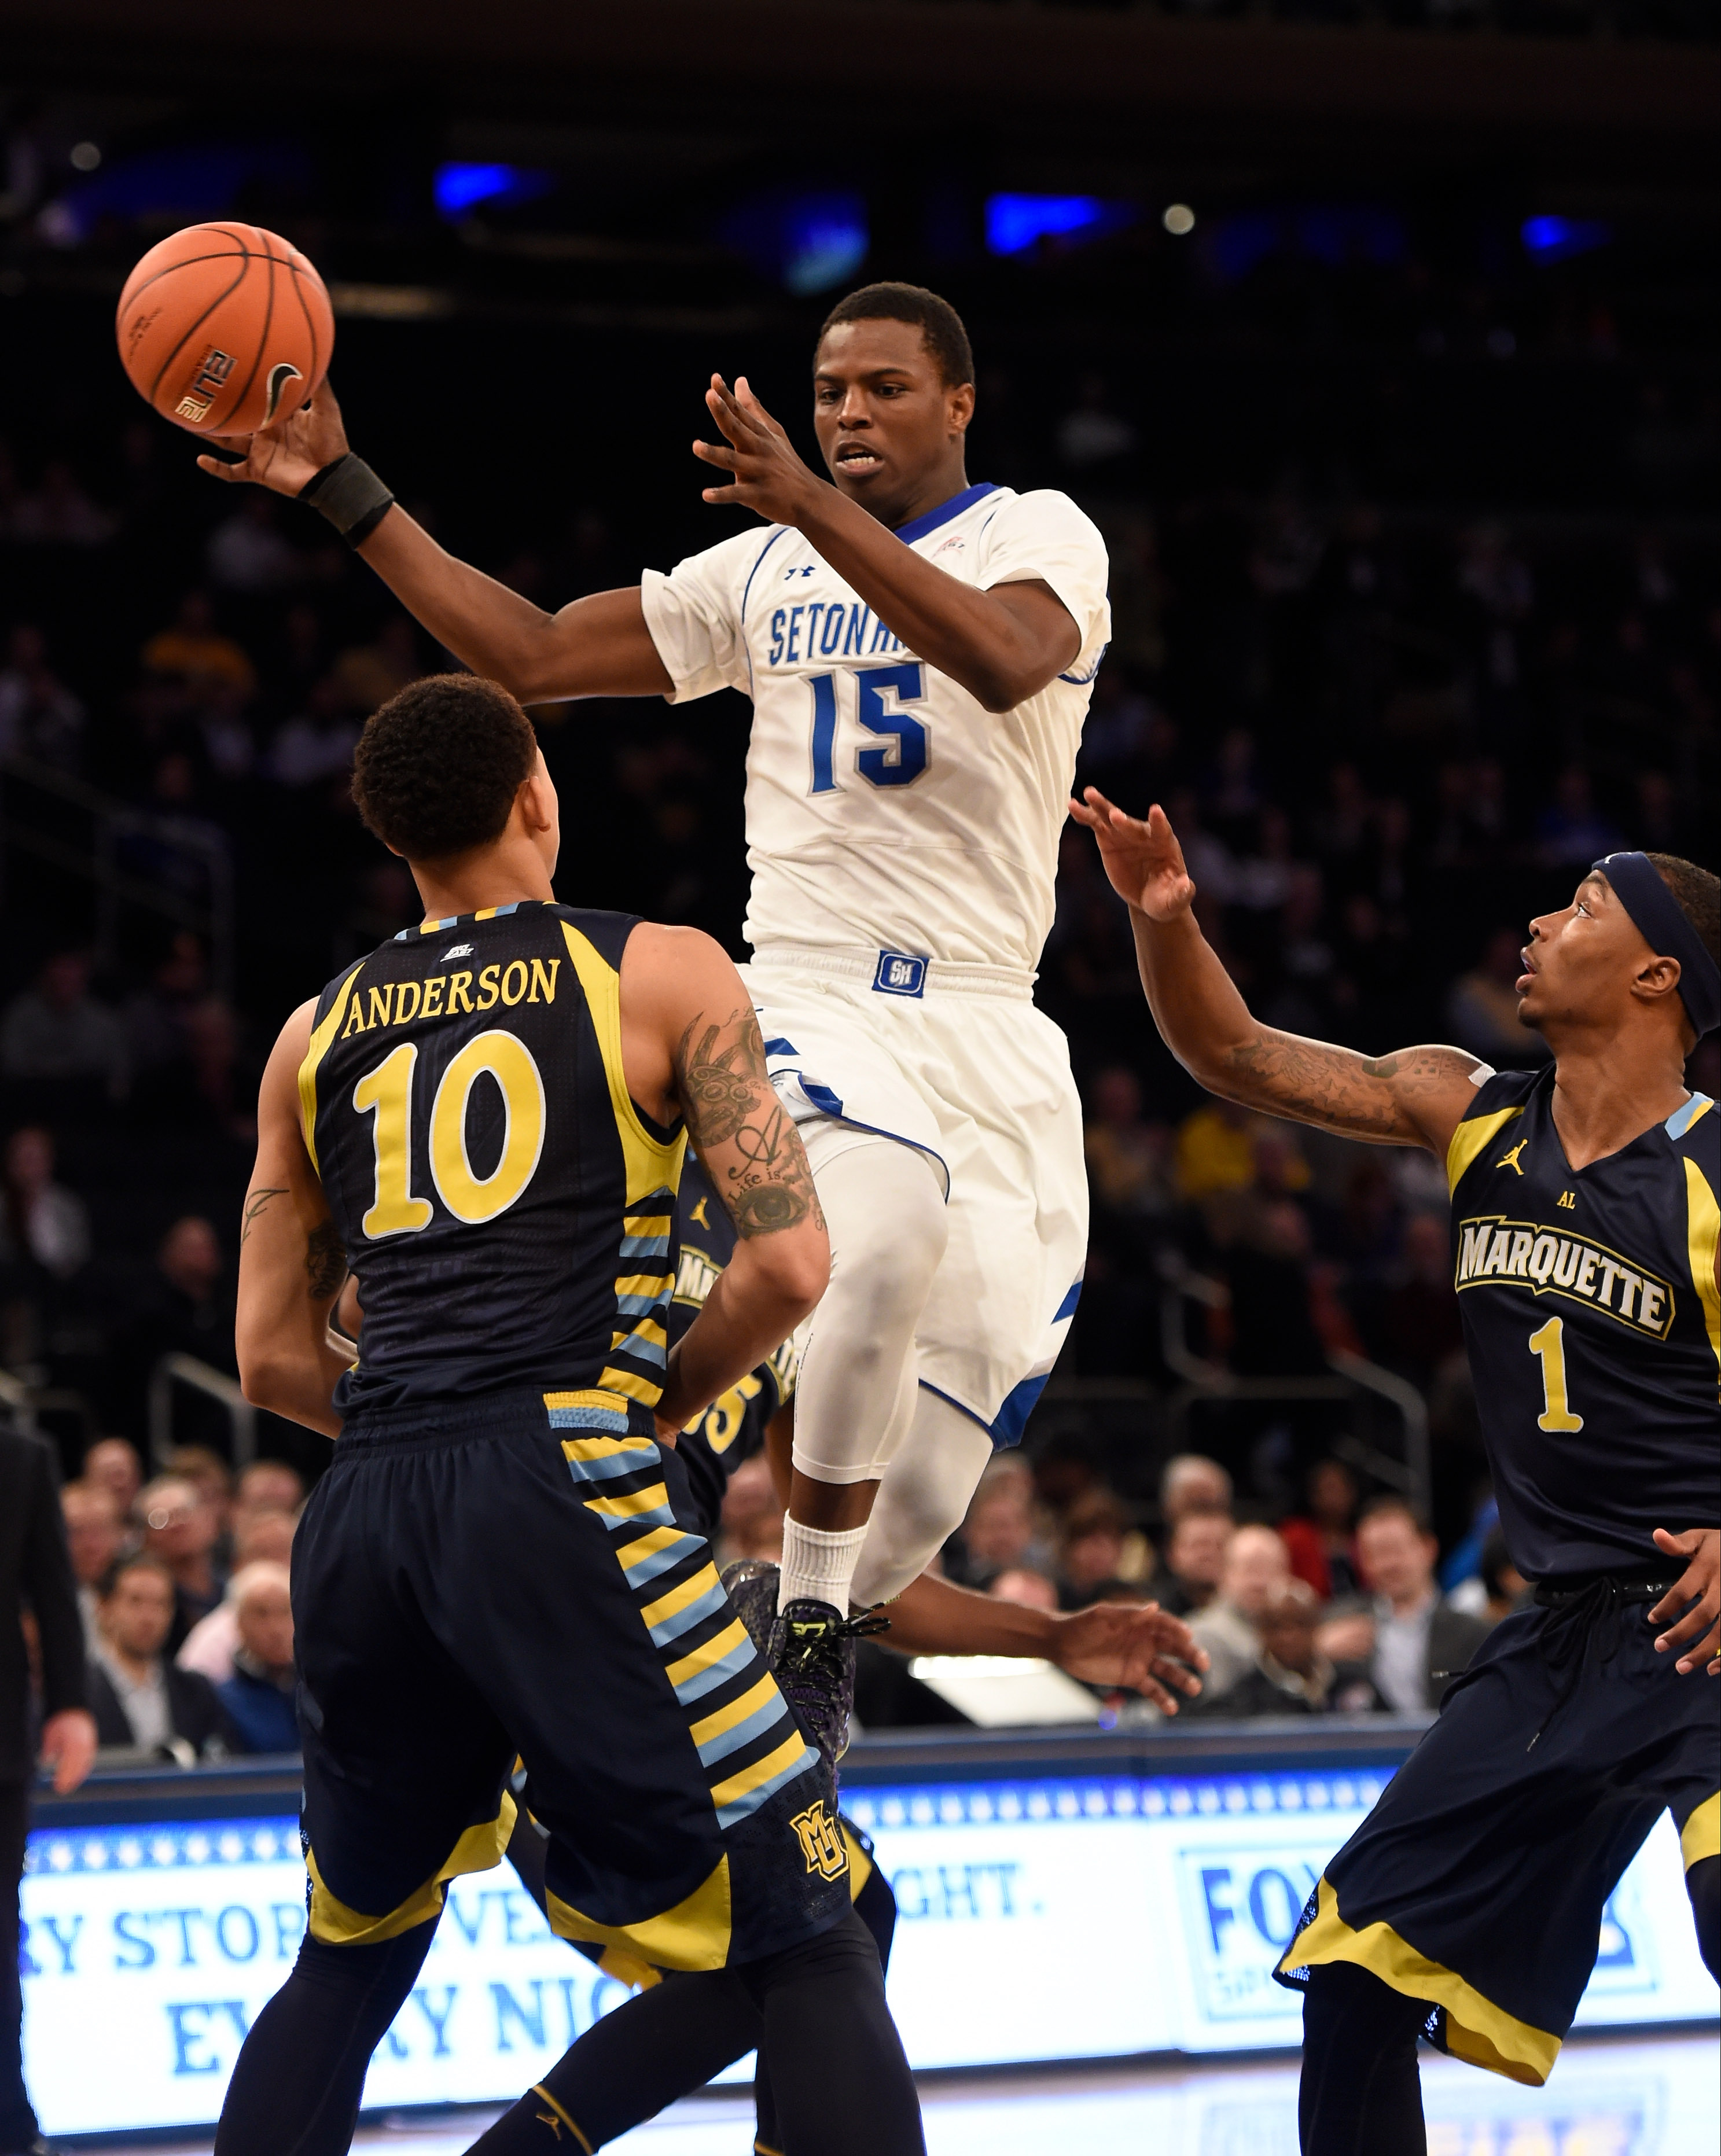 Mar 11, 2015; New York, NY, USA; Seton Hall Pirates guard Isaiah Whitehead (15) passes off over Marquette Golden Eagles forward Juan Anderson (10) during the first round of the Big East Tournament at Madison Square Garden. Mandatory Credit: Robert Deutsch-USA TODAY Sports